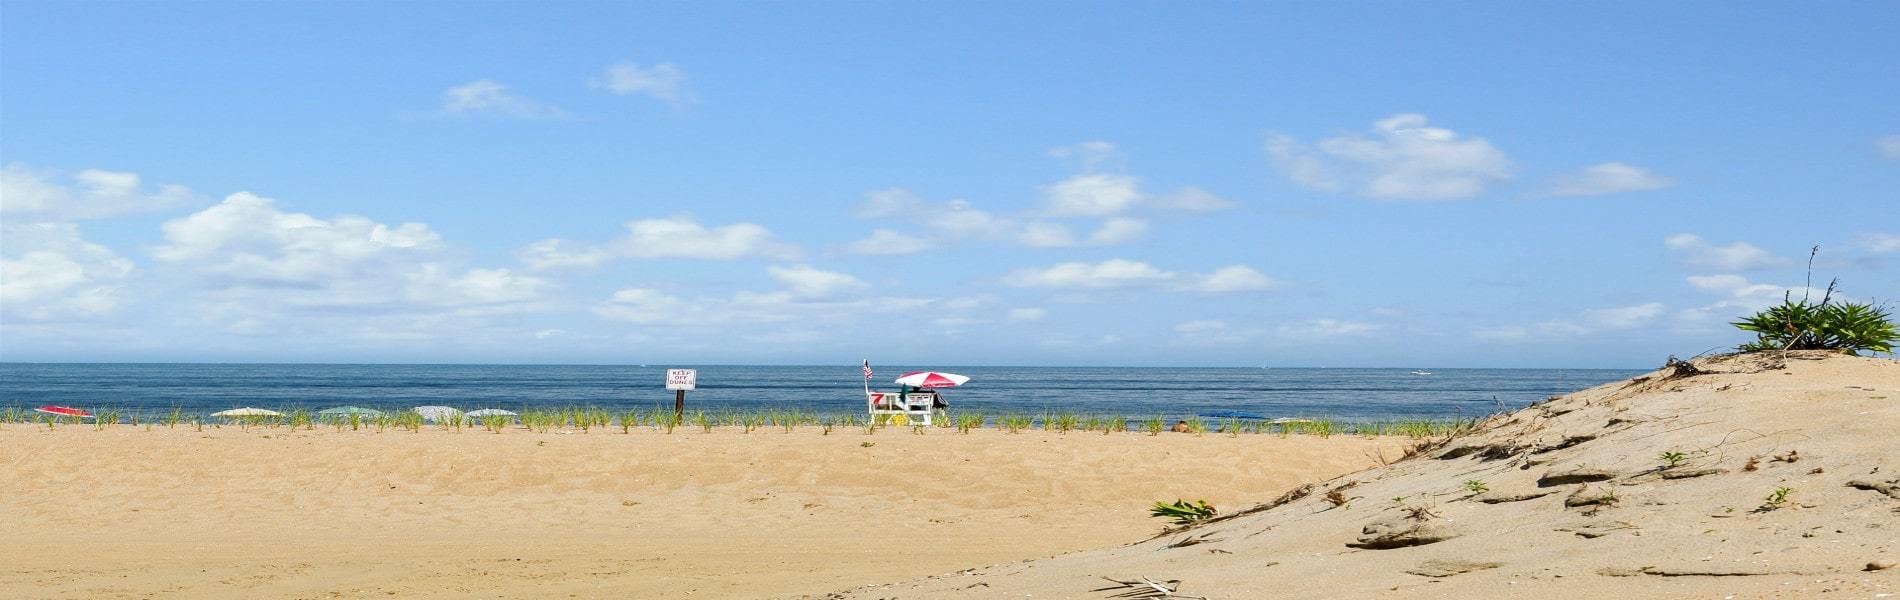 View of beach, water, and blue sky in Ocean County, New Jersey